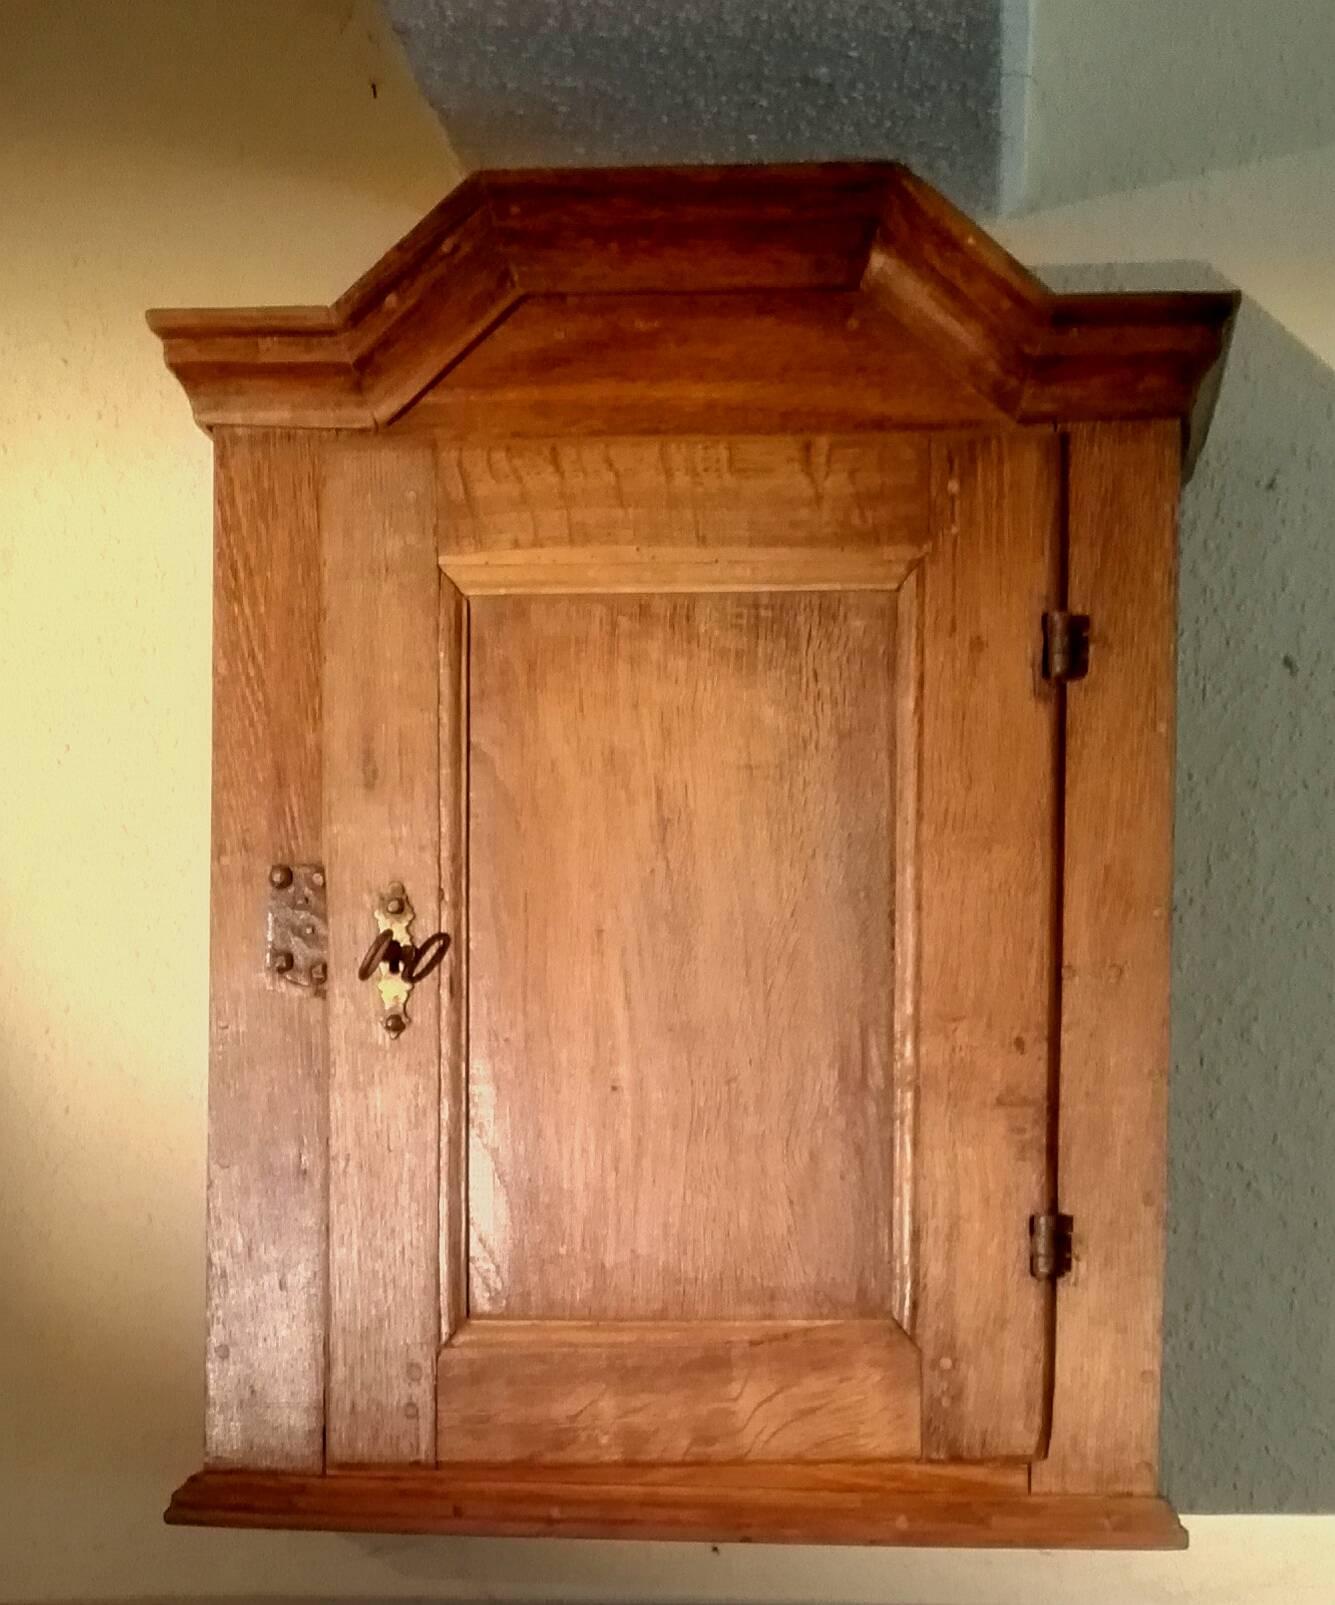 Wall hanging, small cupboard in solid oak. Fully, but sensitive restored, without anything chemical. This fantastic artwork is more than 250 years old and now in the best condition! Please note the dimension!